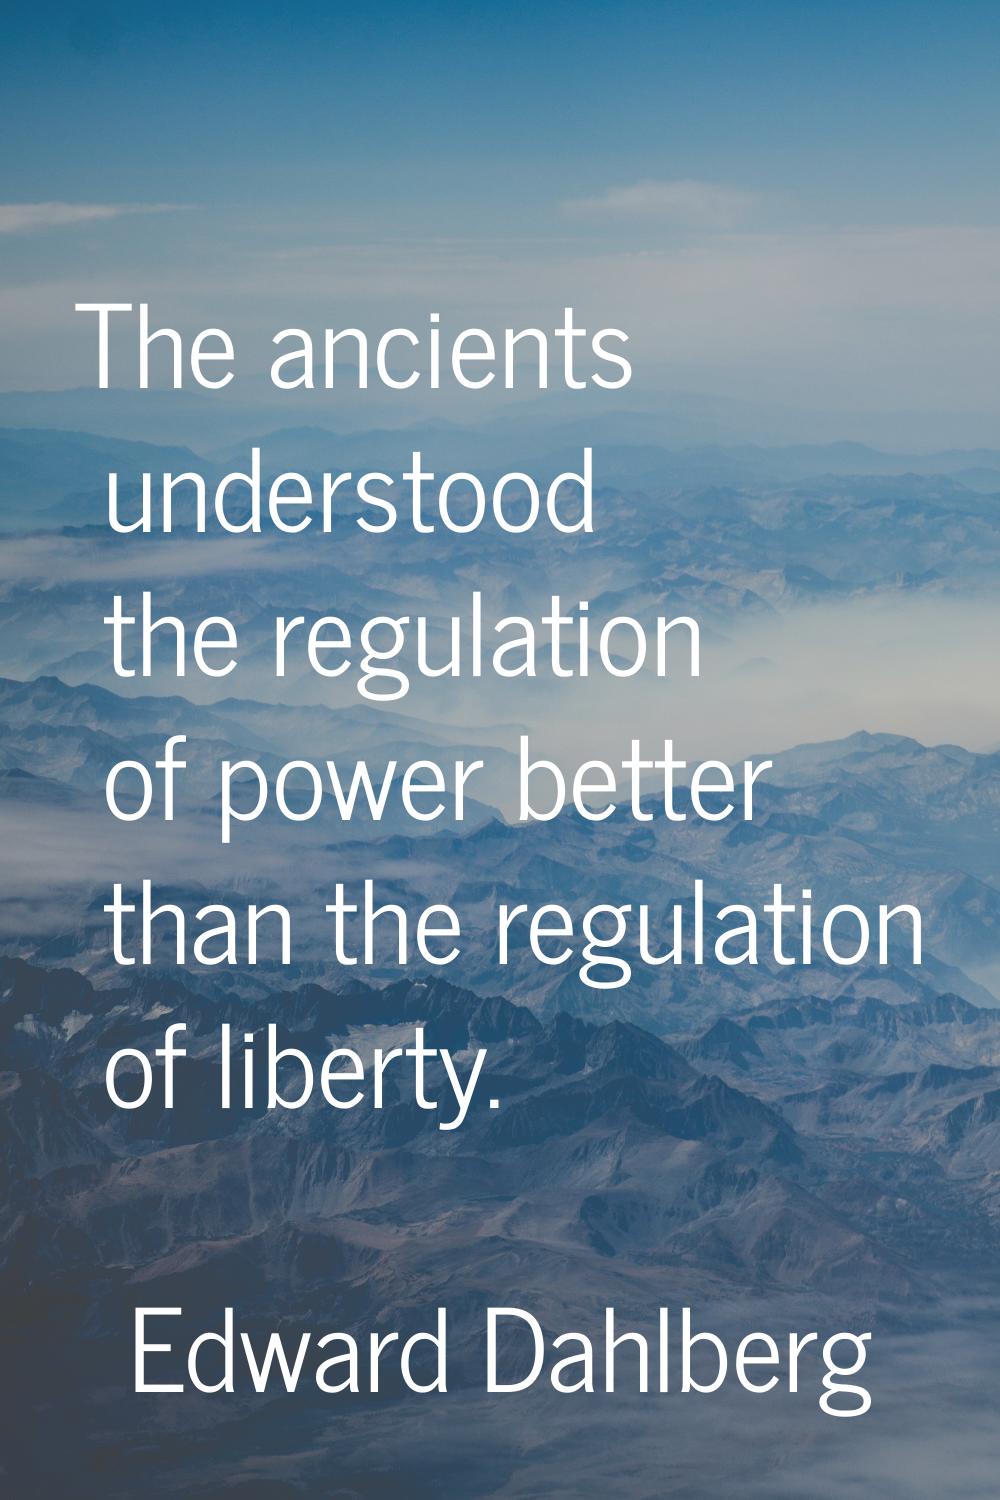 The ancients understood the regulation of power better than the regulation of liberty.